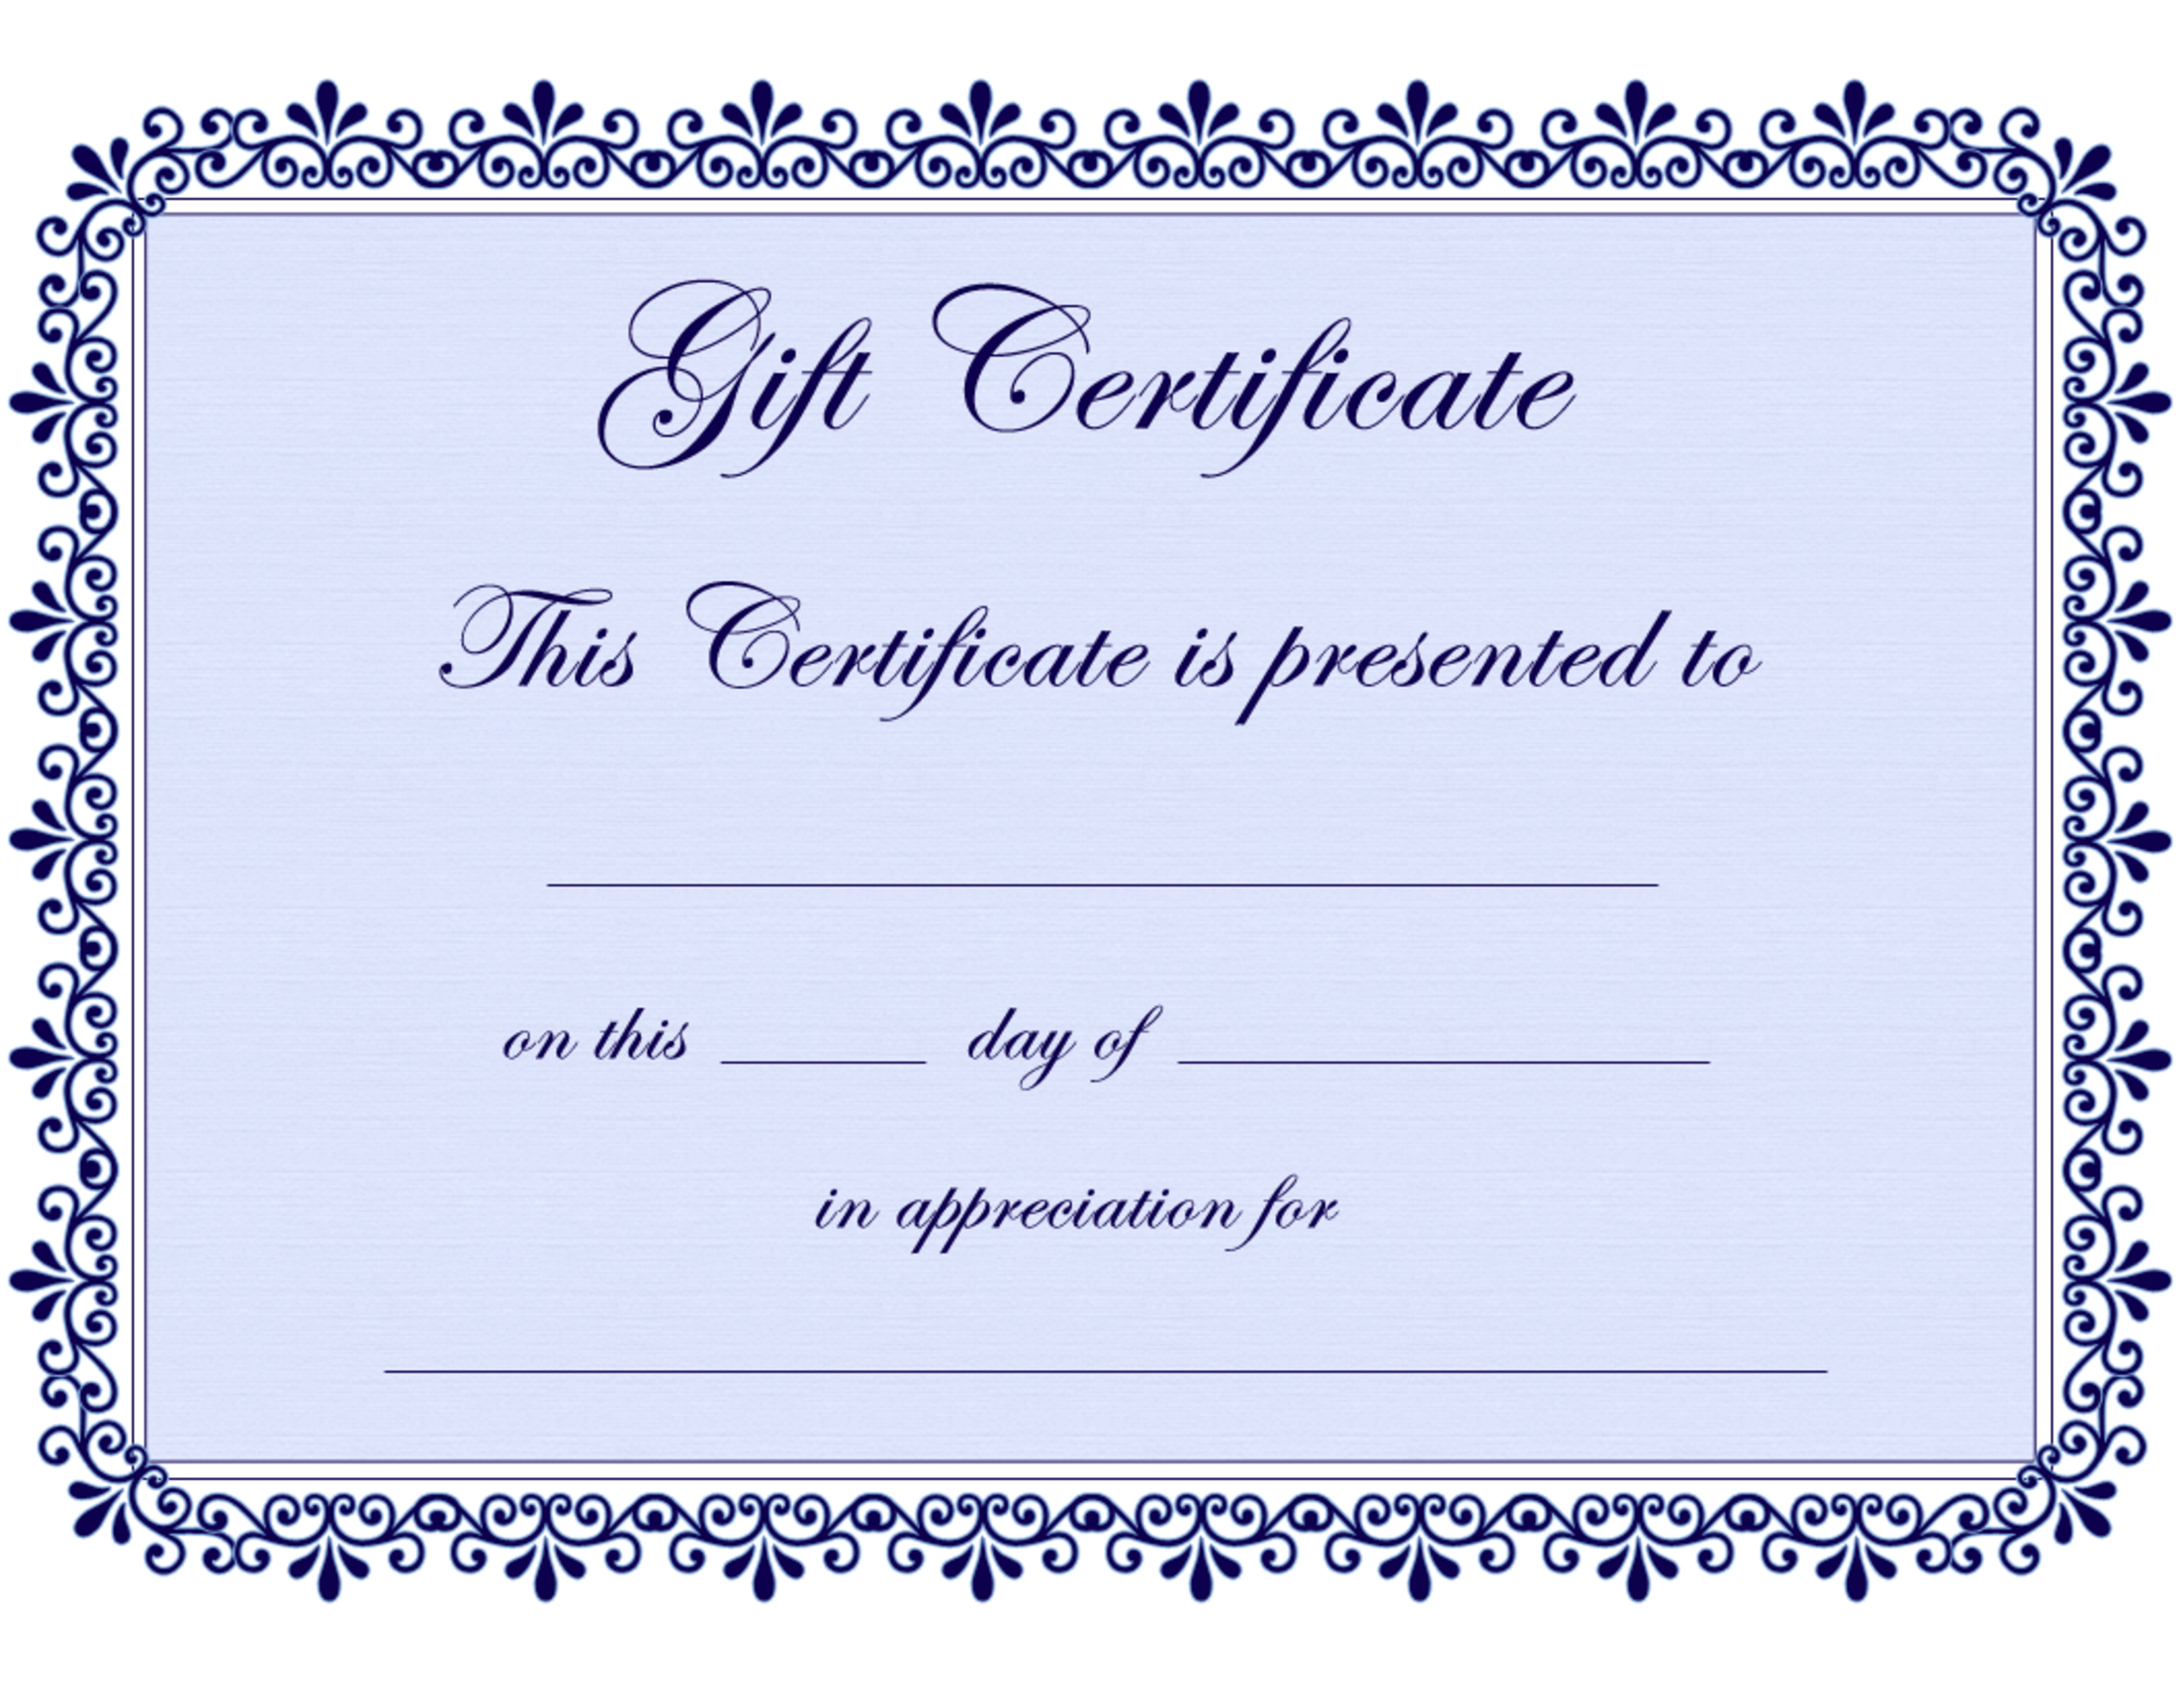 Clipart Gift Certificate Template Throughout Present Certificate Templates